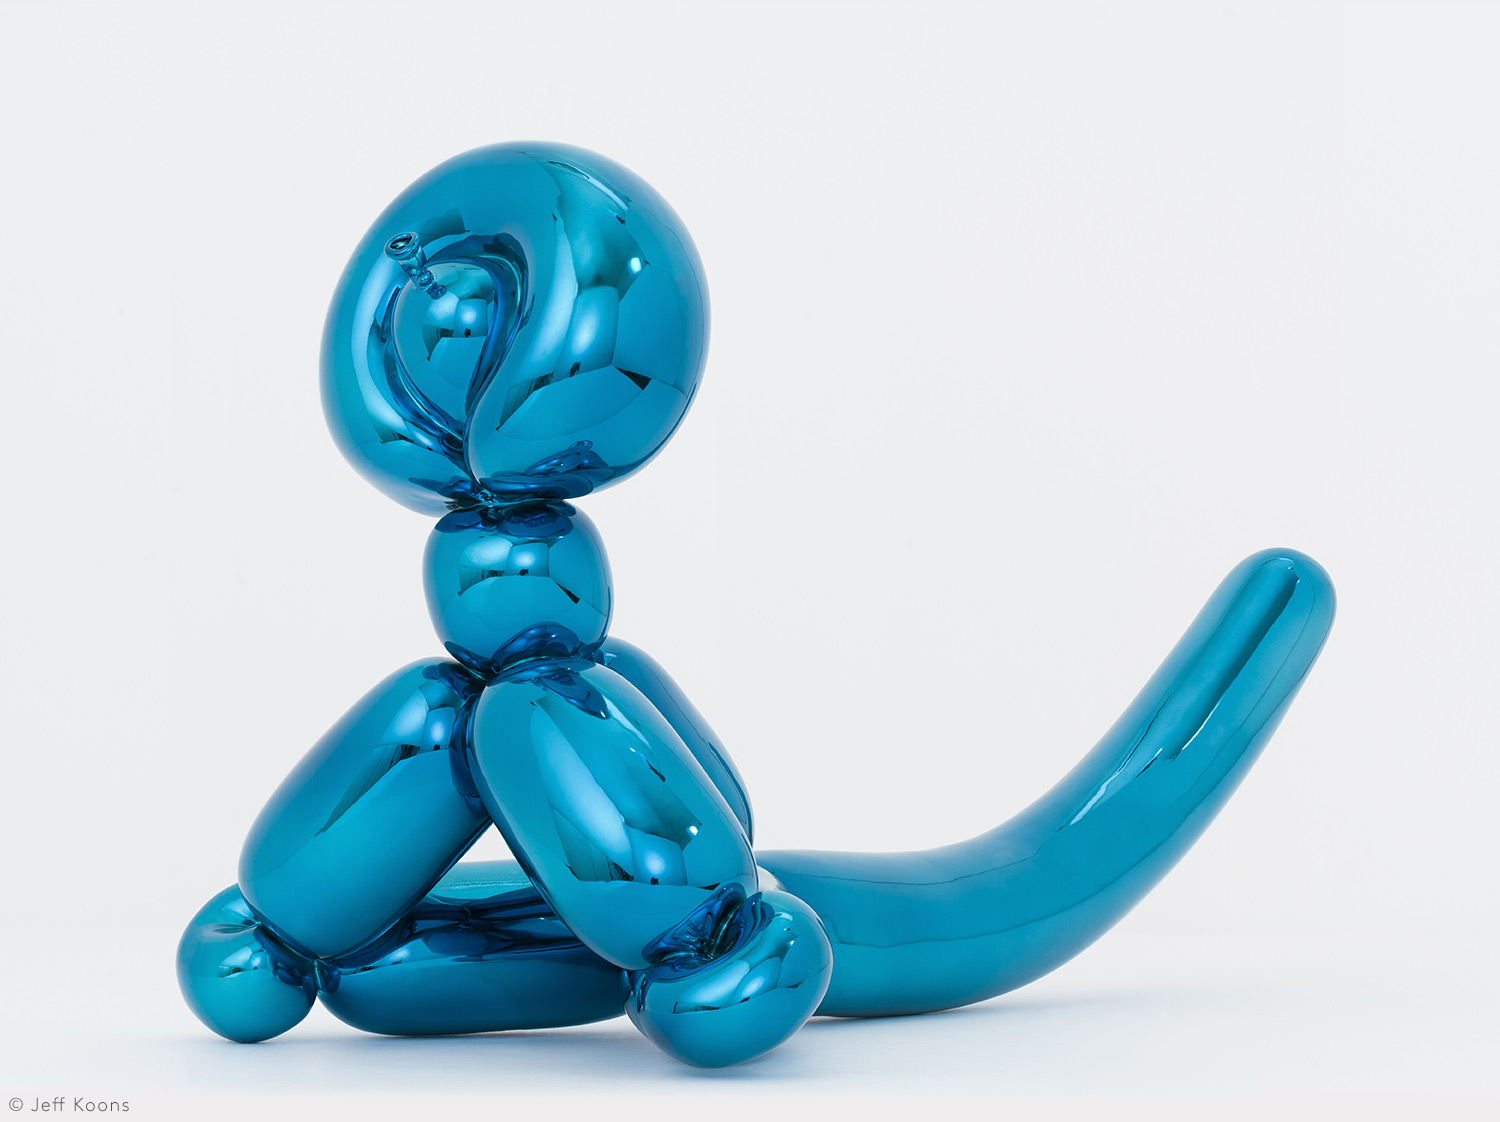 China Porcelain edition of the collection BALLOON MONKEY (BLUE) by Jeff Koons | Bernardaud